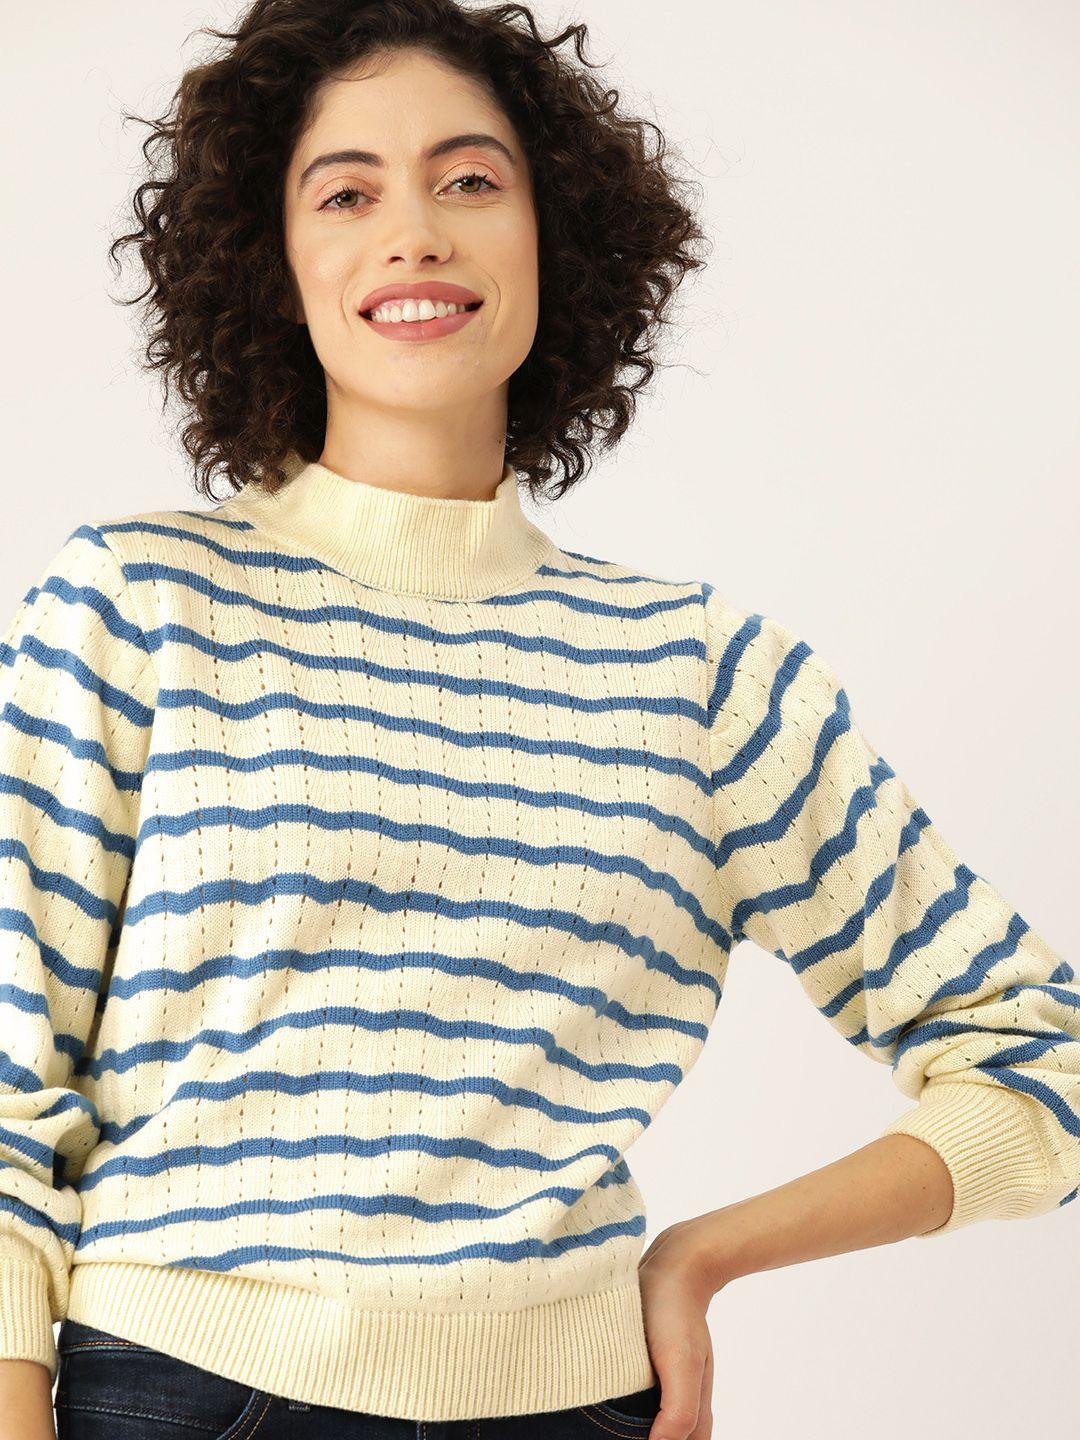 mast & harbour acrylic open knit striped pullover